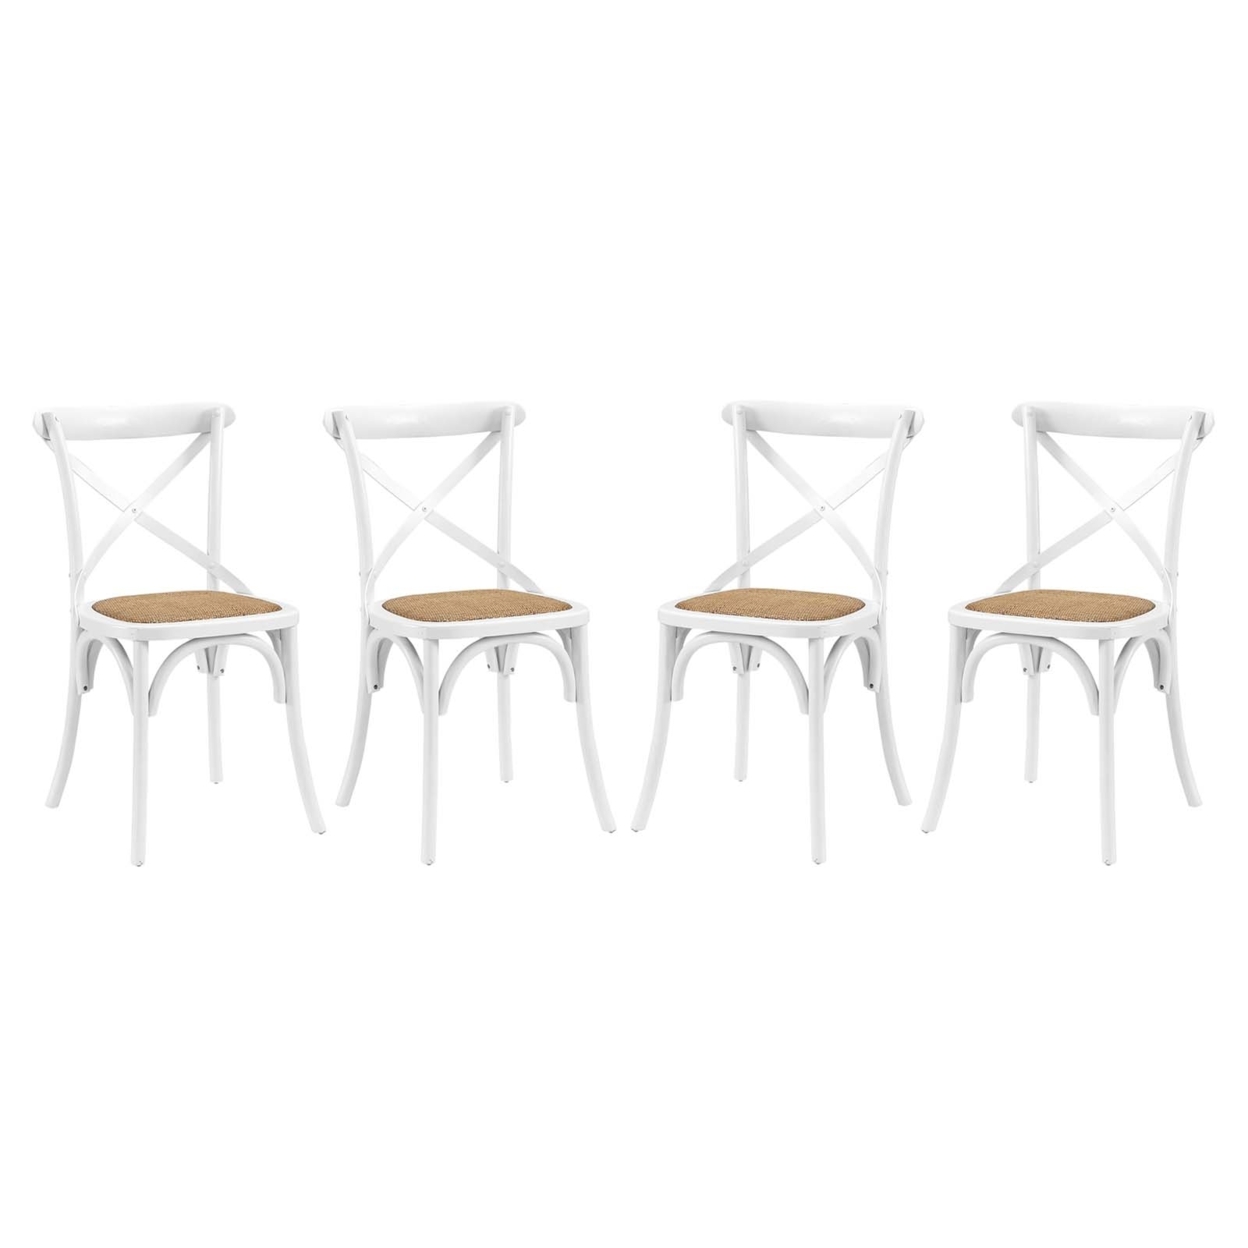 Gear Dining Side Chair Set Of 4,White